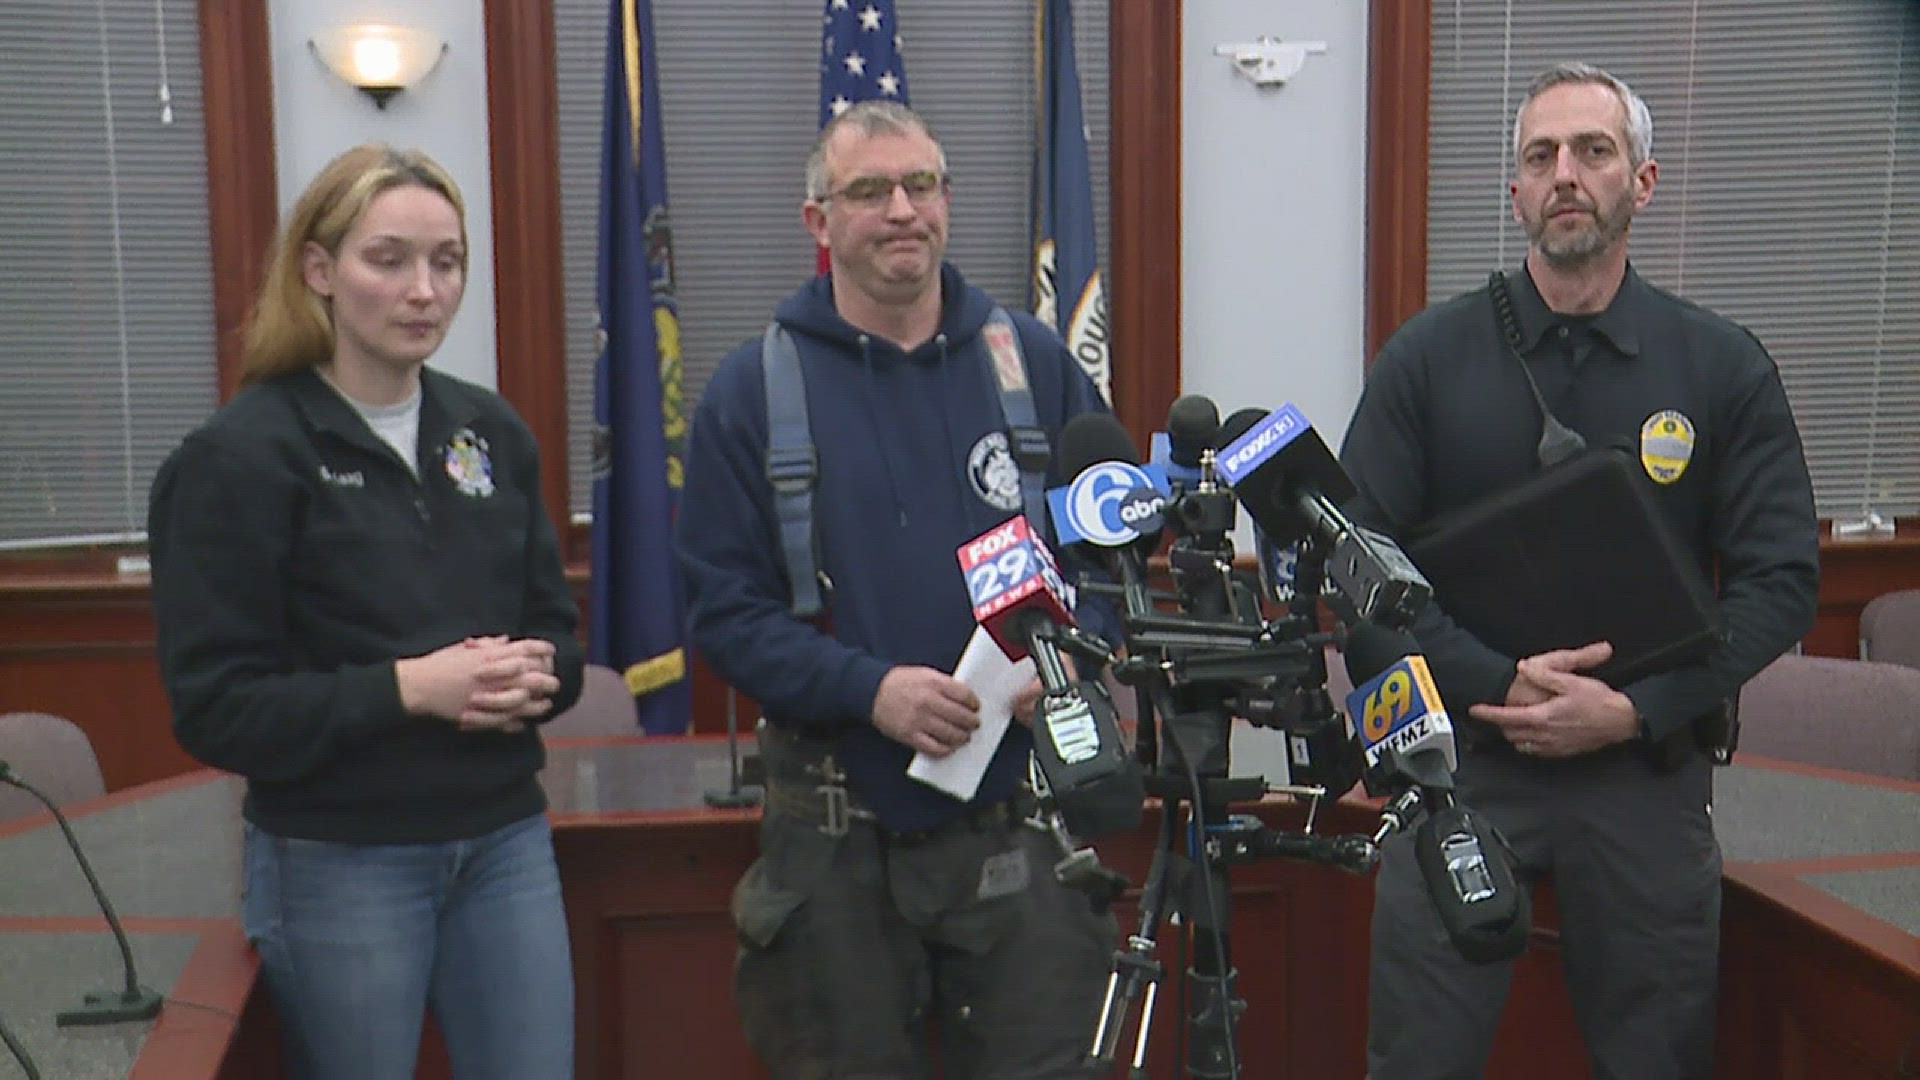 West Reading Mayor Samantha Kaag, Fire Chief Chad Moyer, and Police Chief Wayne Holben give update on R.M Palmer Co. chocolate factory explosion on March 26, 2023.